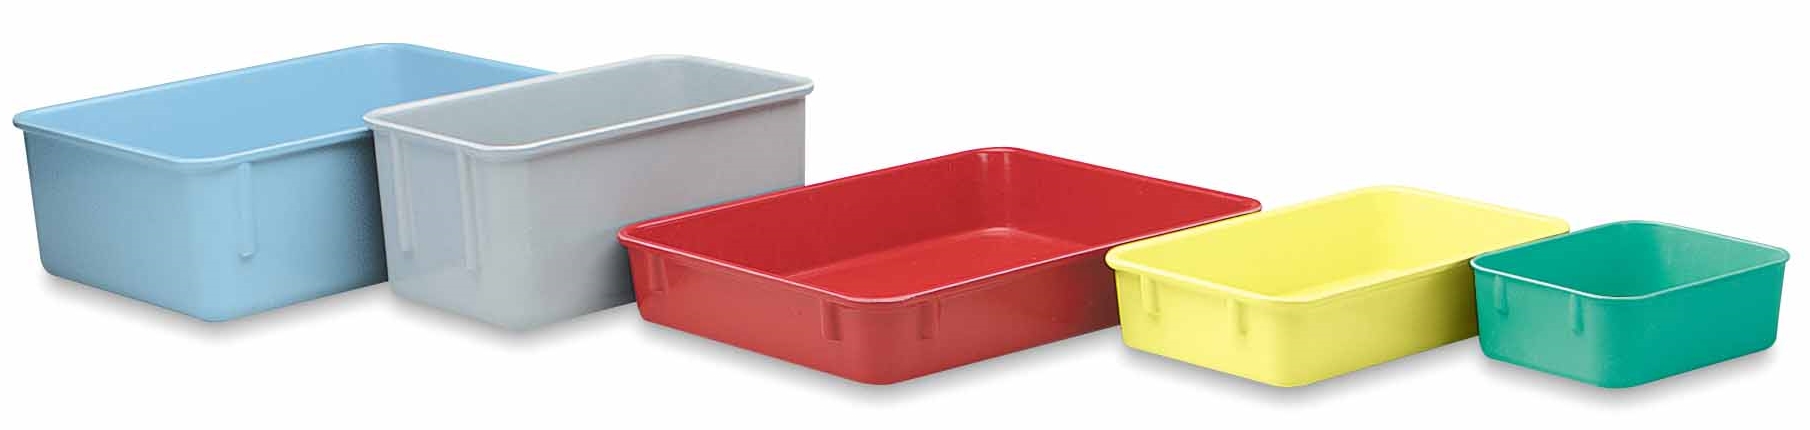 LEWISbins Nest Only Heavy Duty Containers